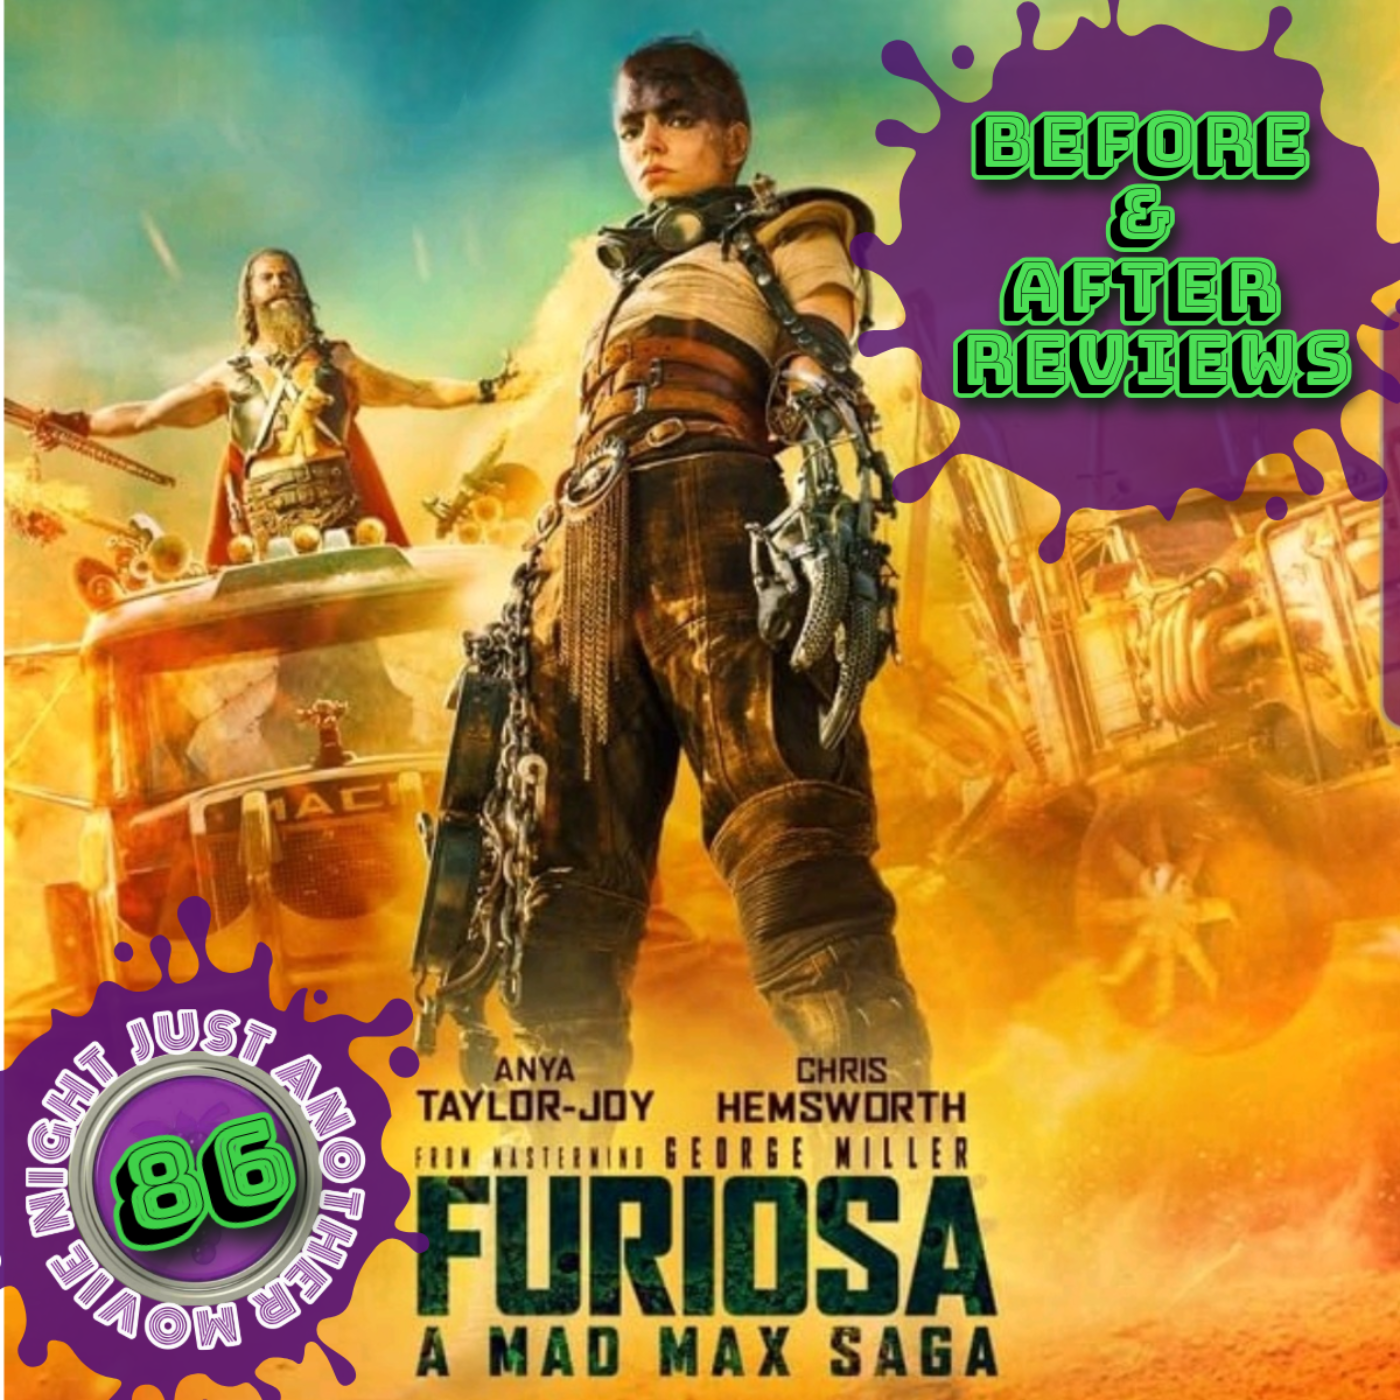 Before and After reviews episode 86: Furiosa